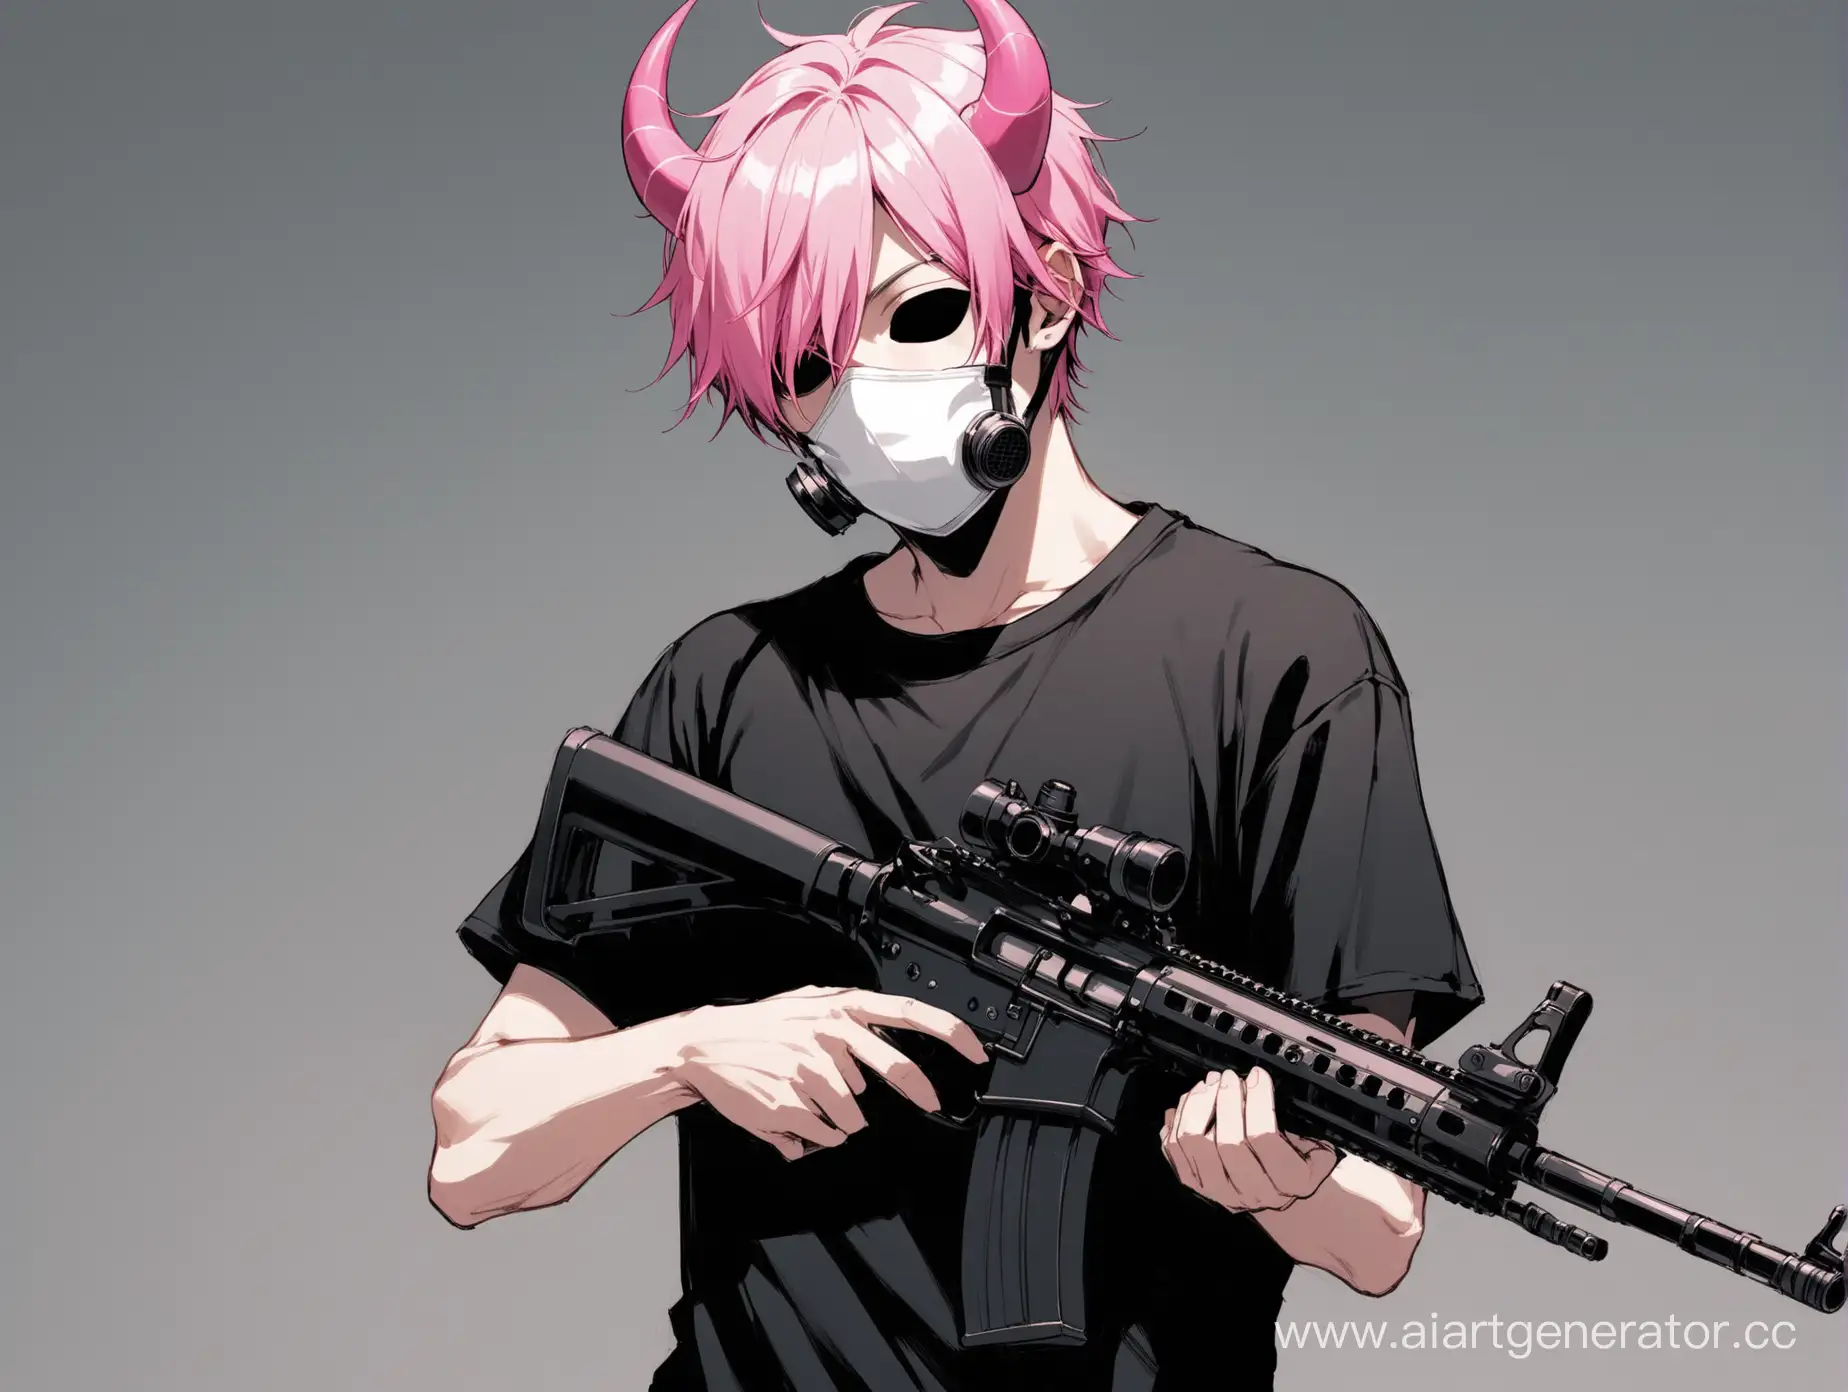 PinkHaired-Young-Adult-with-Respirator-Mask-Holding-Rifle